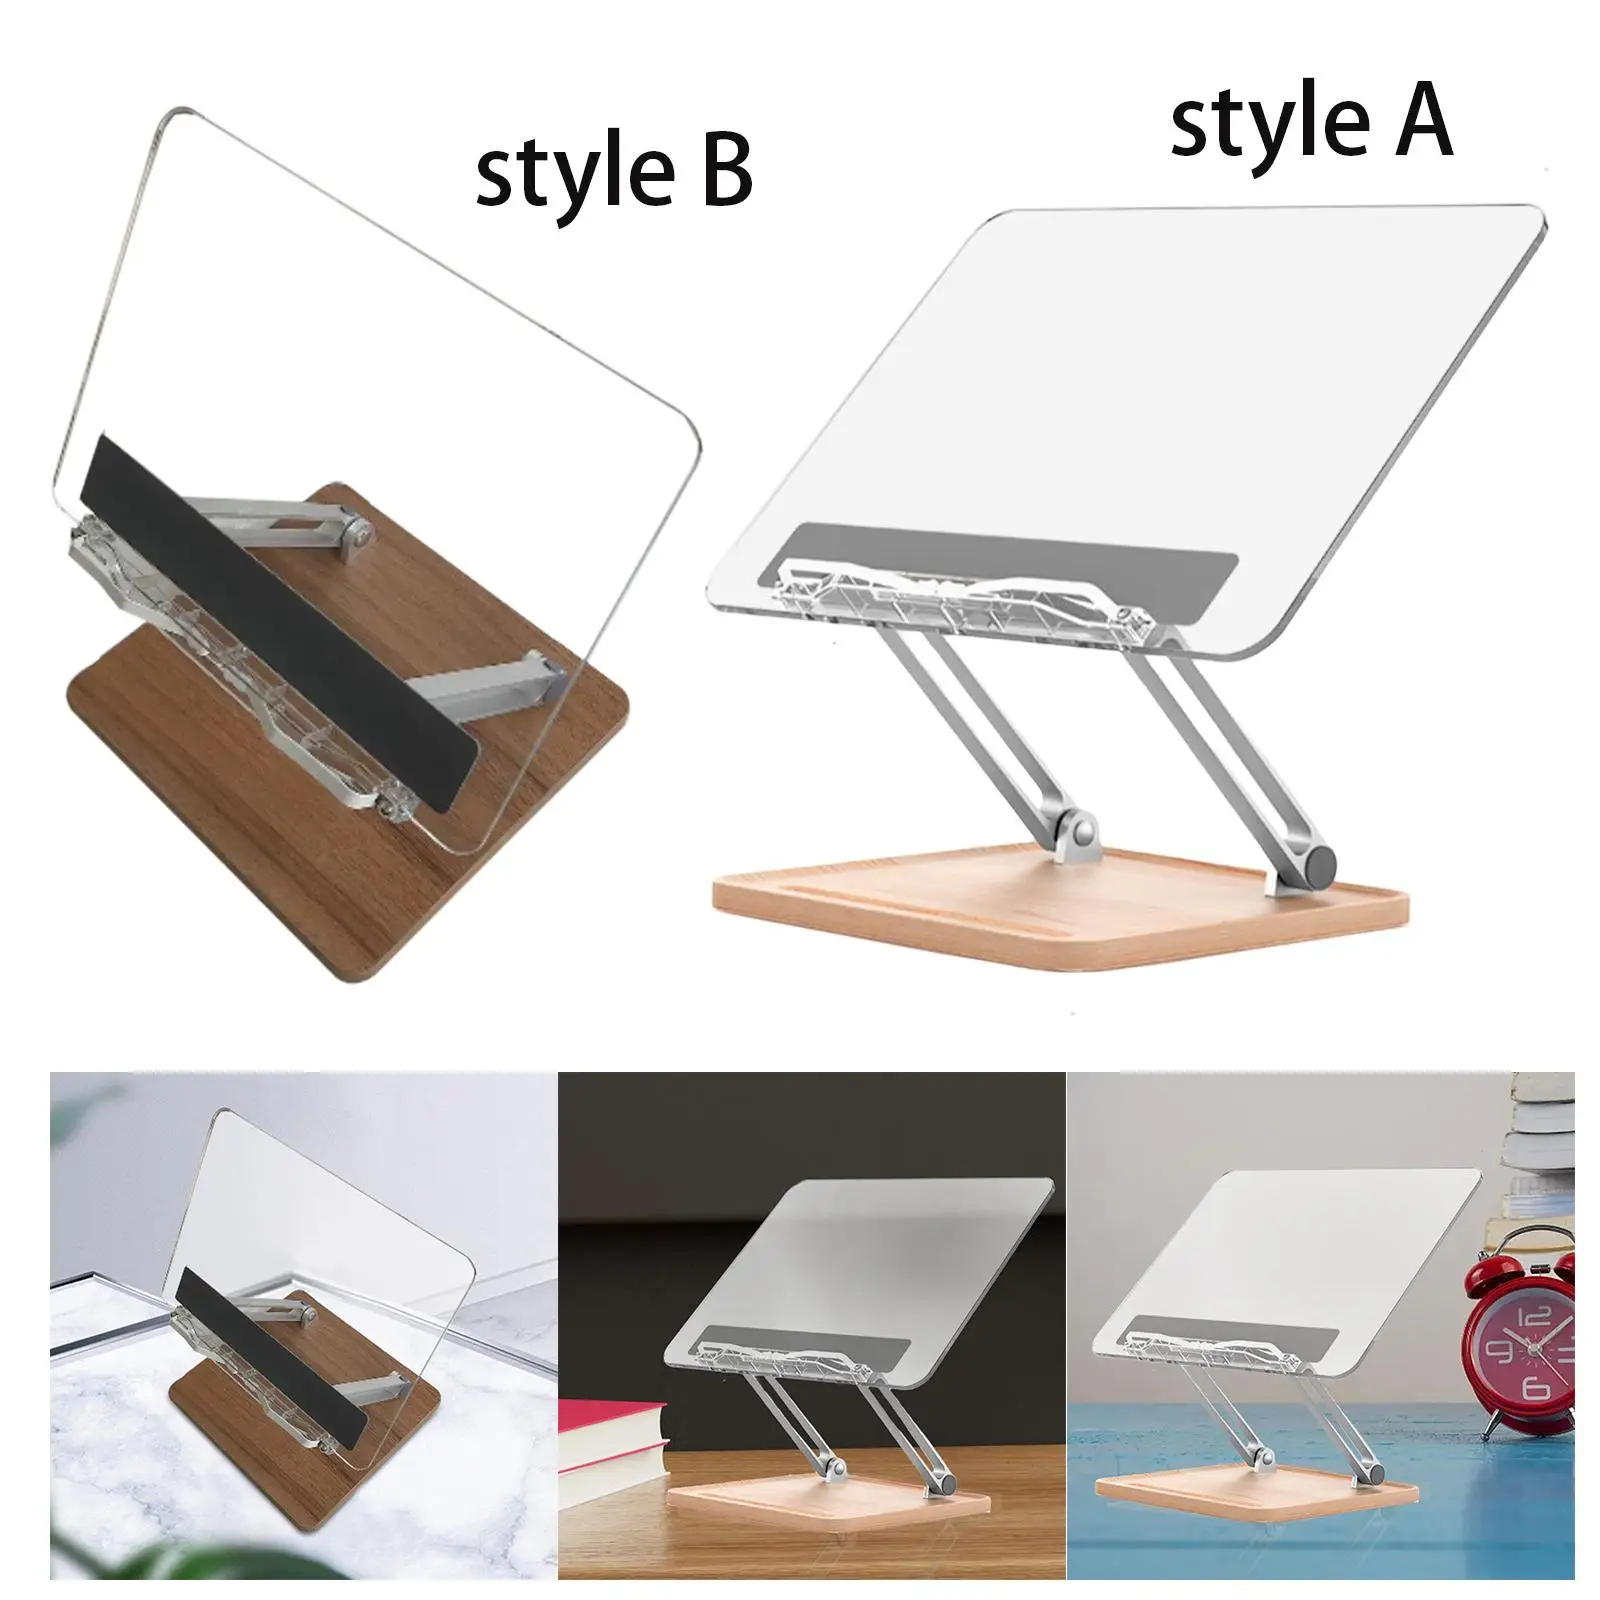 Book Stand Foldable Adjustable Multifunctional Steady Comfortable Portable Reading Stand for Desk Bedroom Desktop Office Display